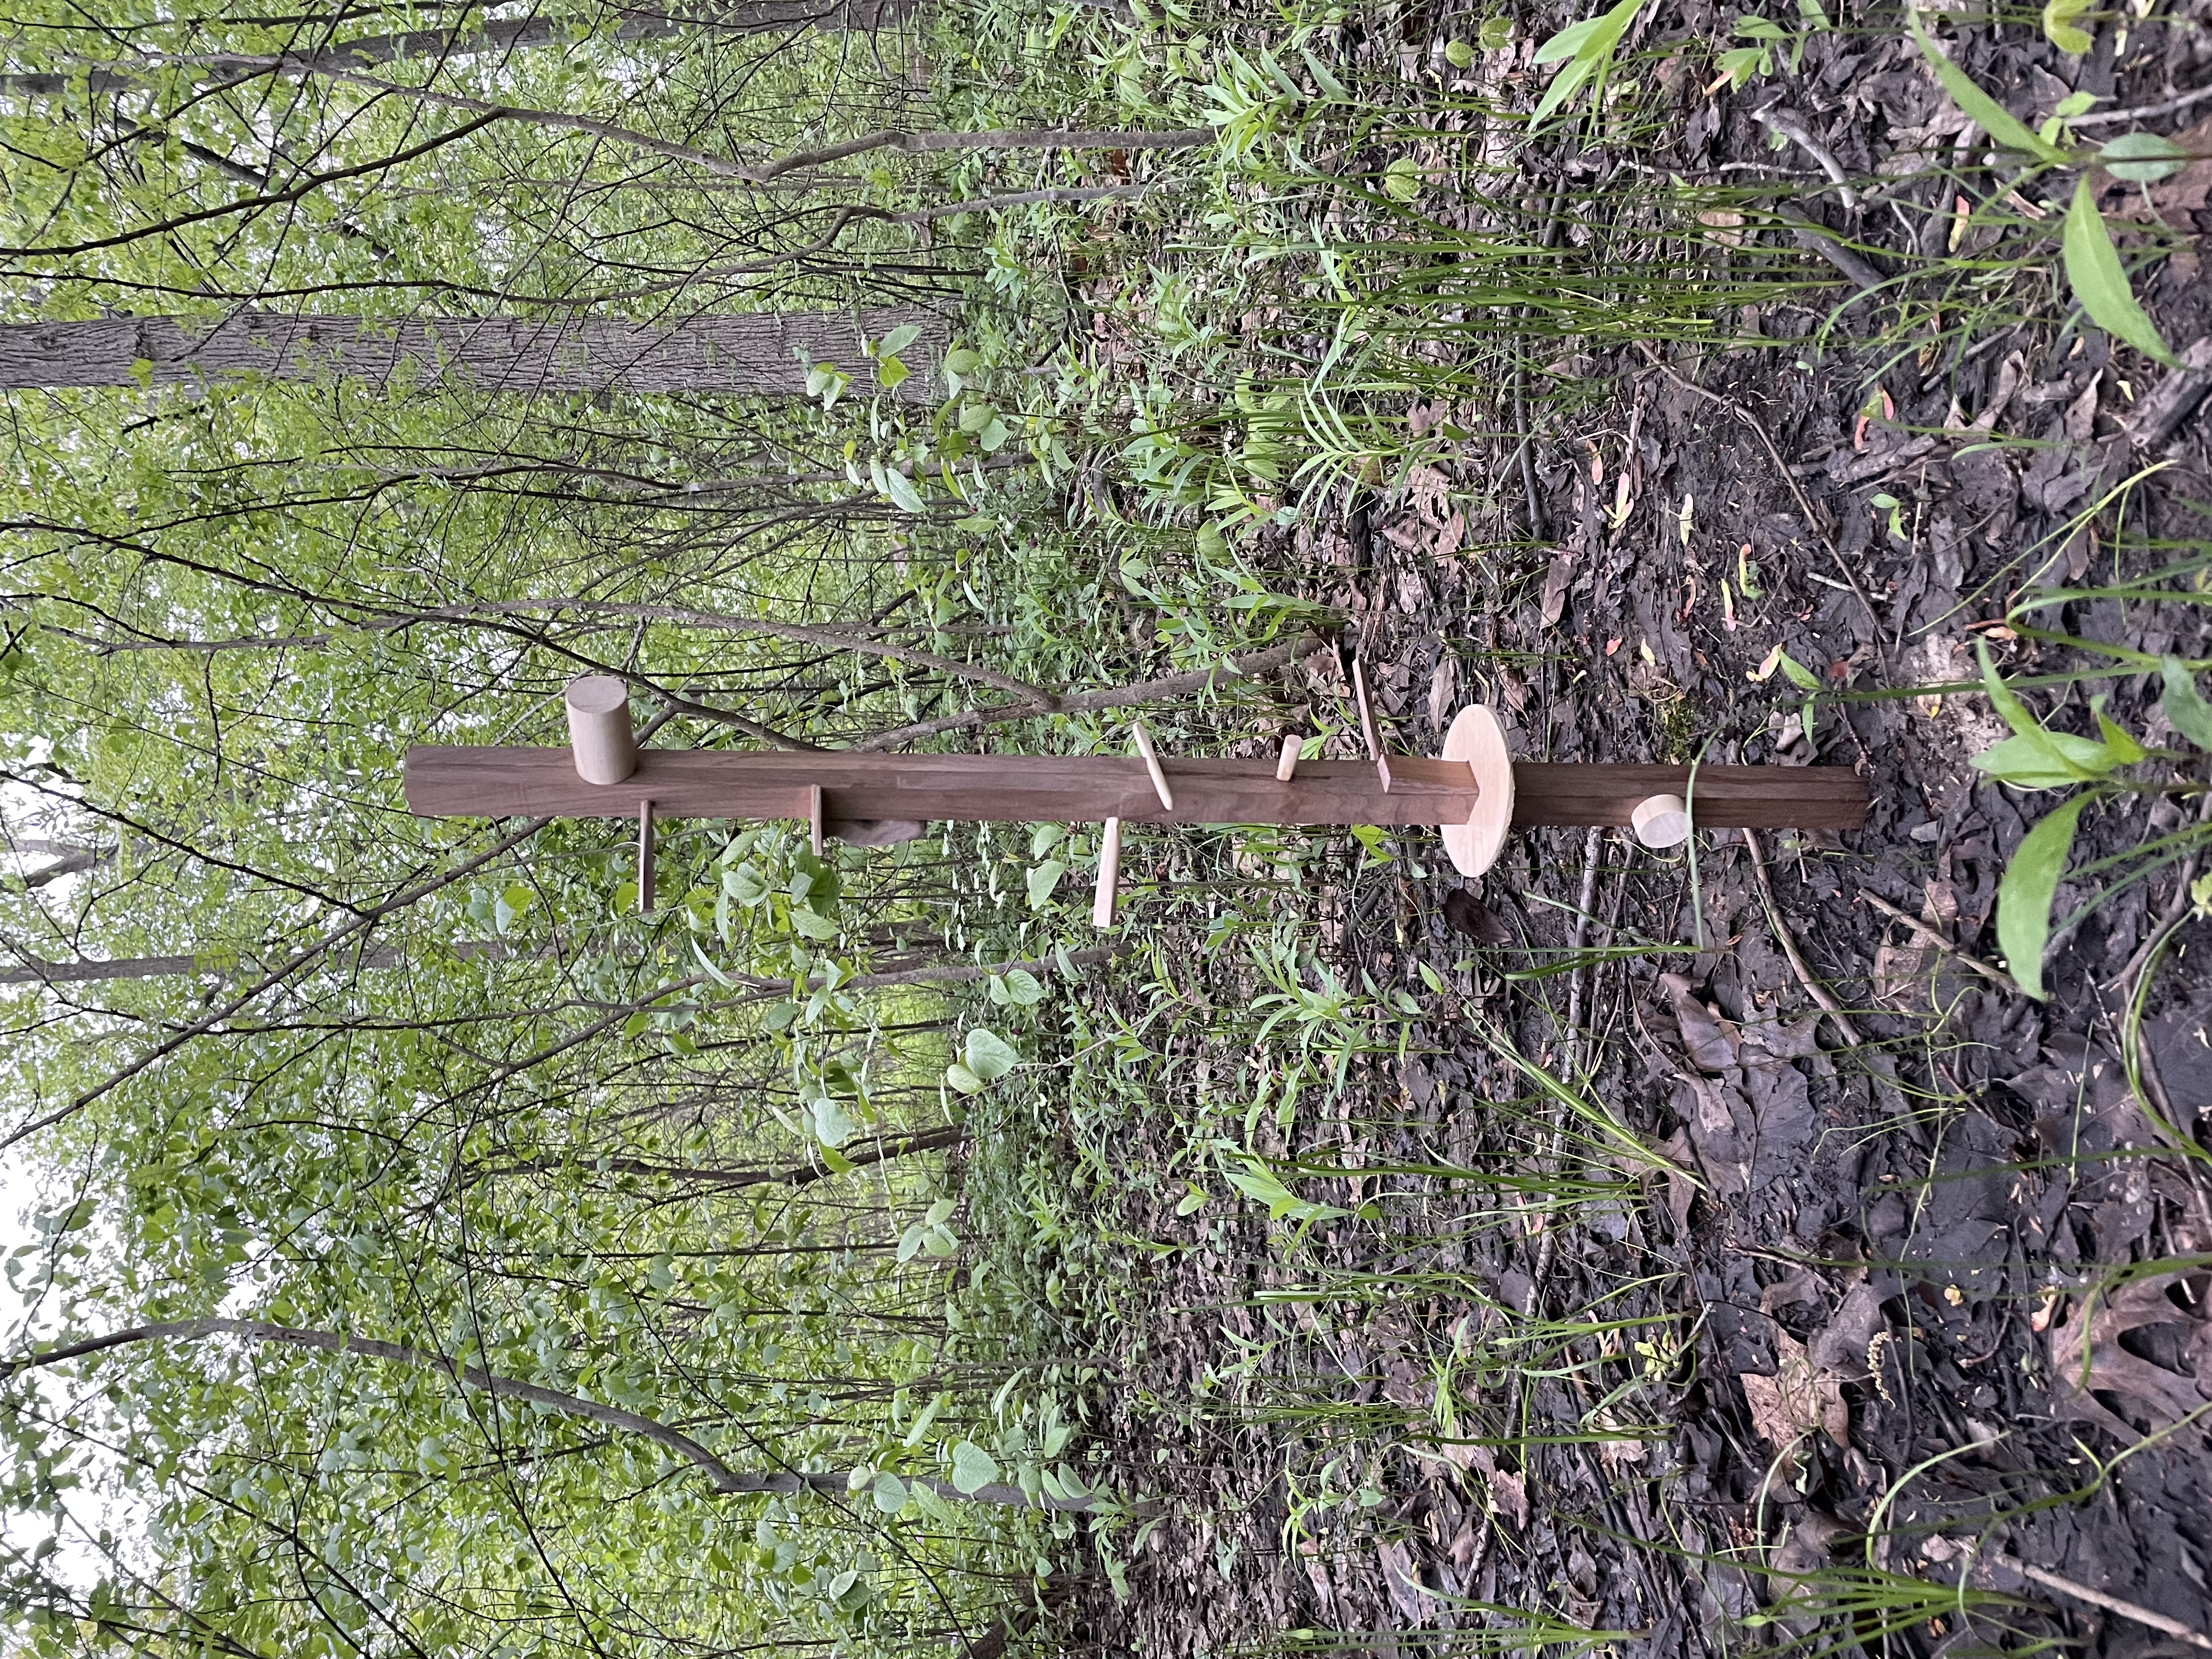 a dark wood post is sunken into a dirt patch in a forest preserve, and small, lighter wood protrusions of different varieties stick out. birds are meant to sit on different areas